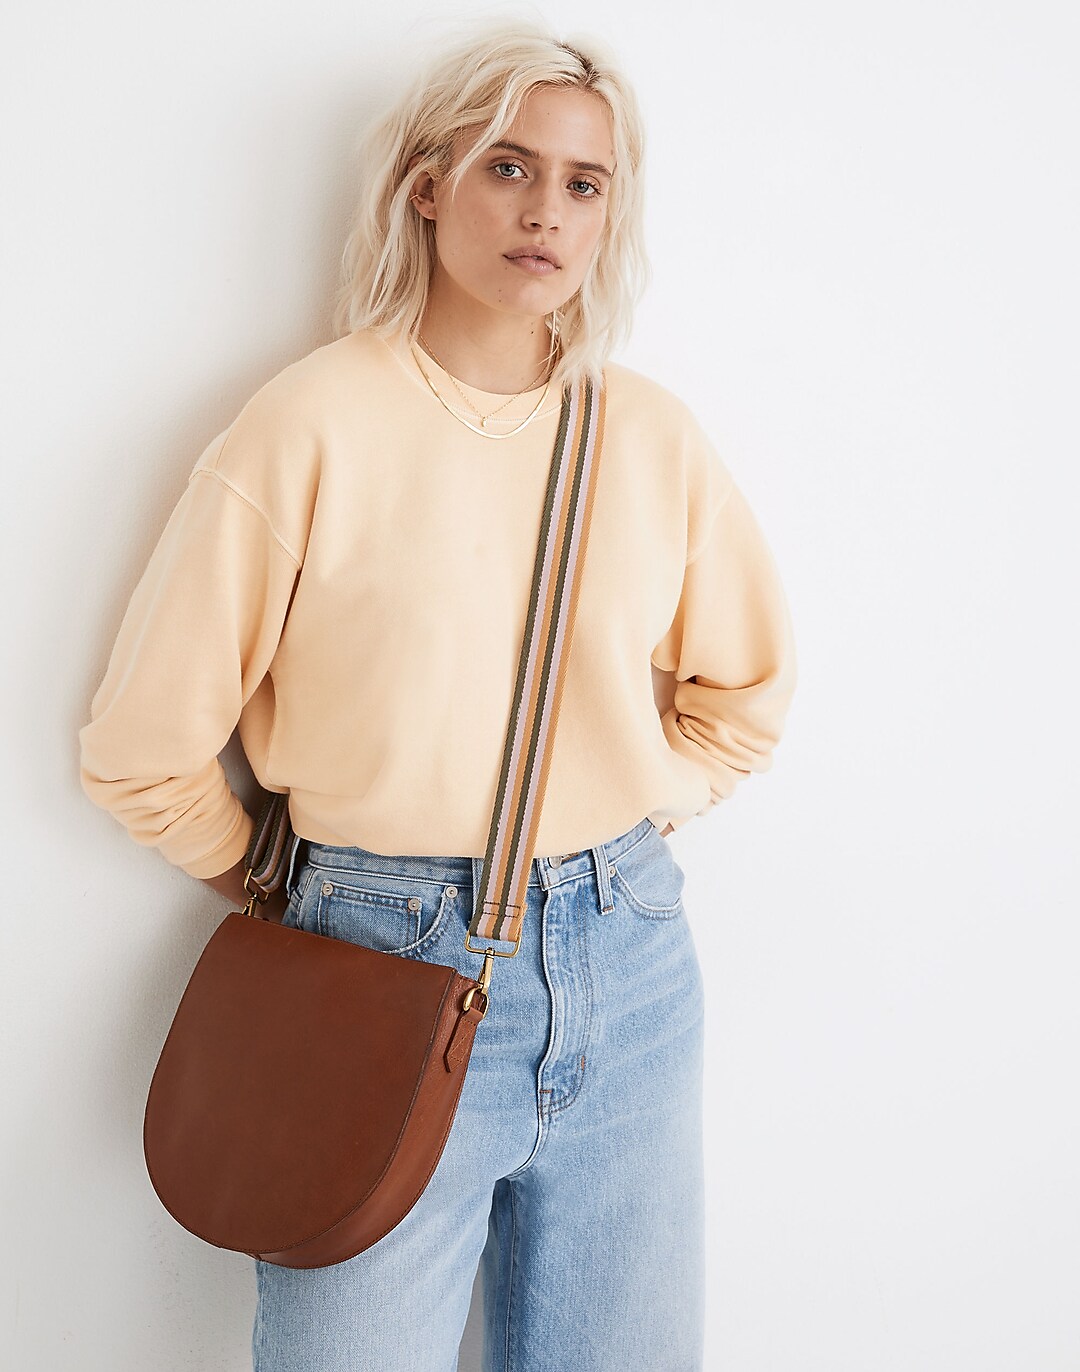 The Crossbody Bag Strap: Leather Edition